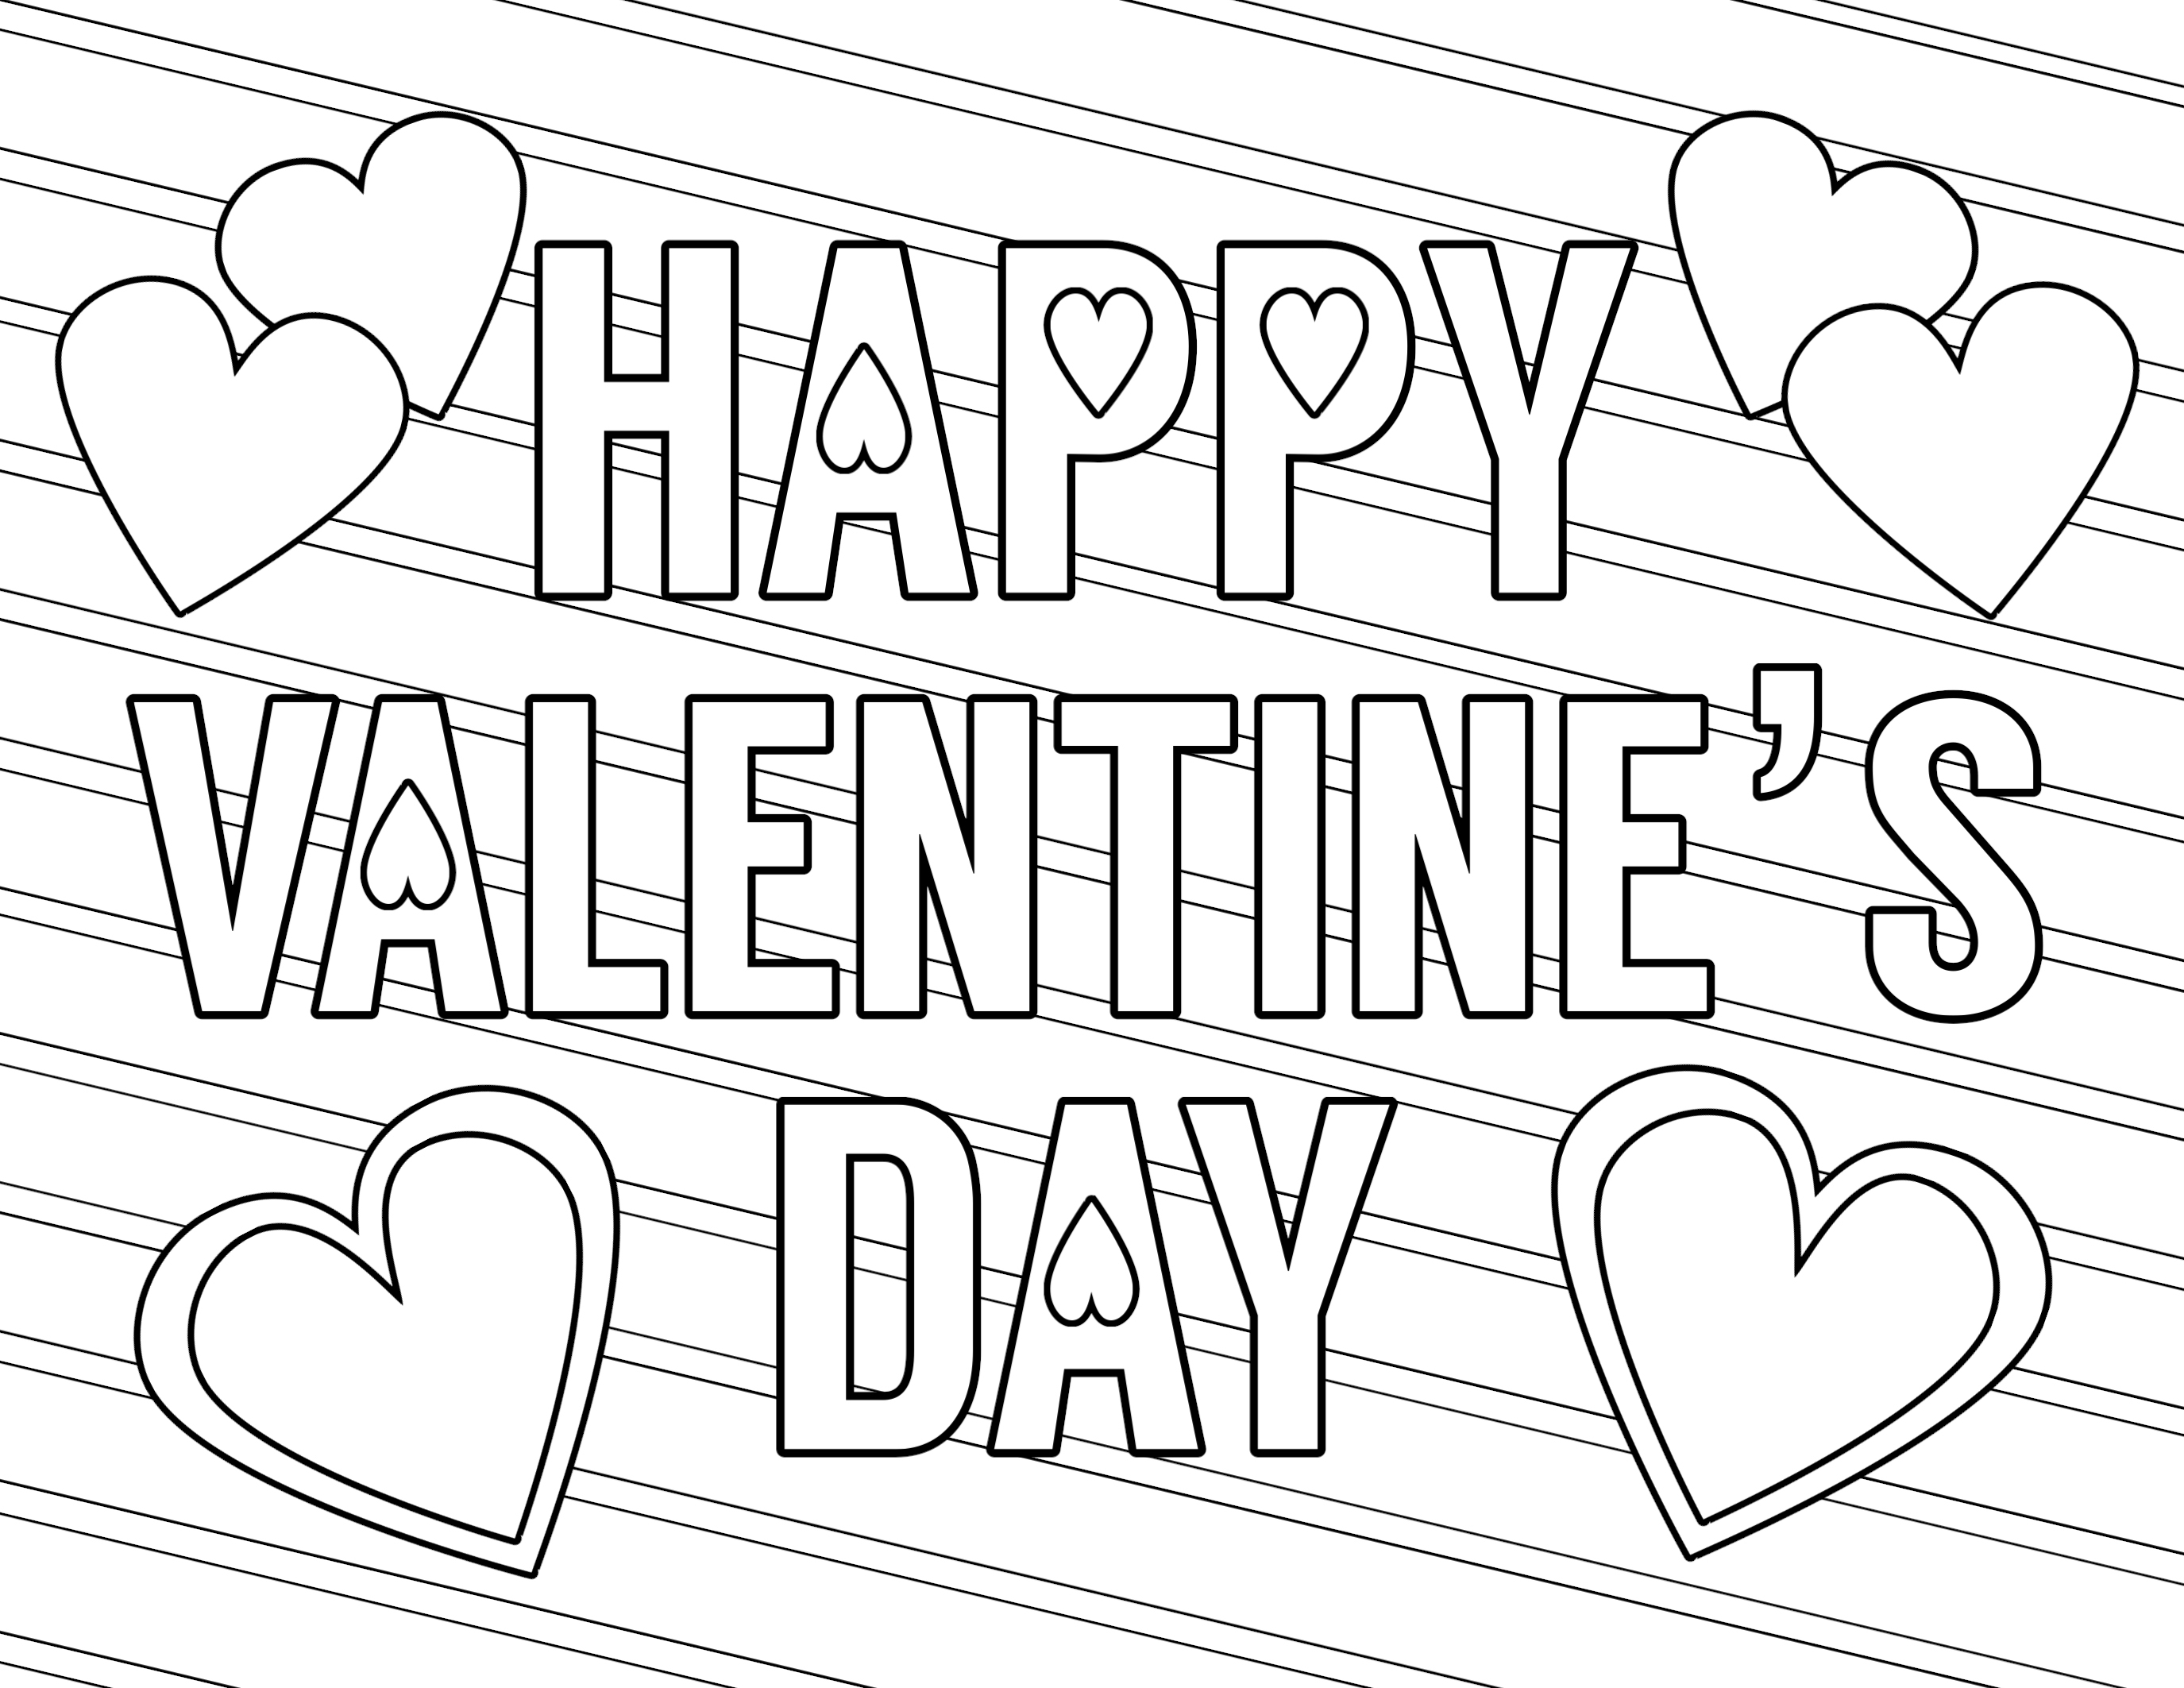 Coloring Pages : Valentines Day Coloring Page Pages Of Free - Free Printable Valentines Day Coloring Pages